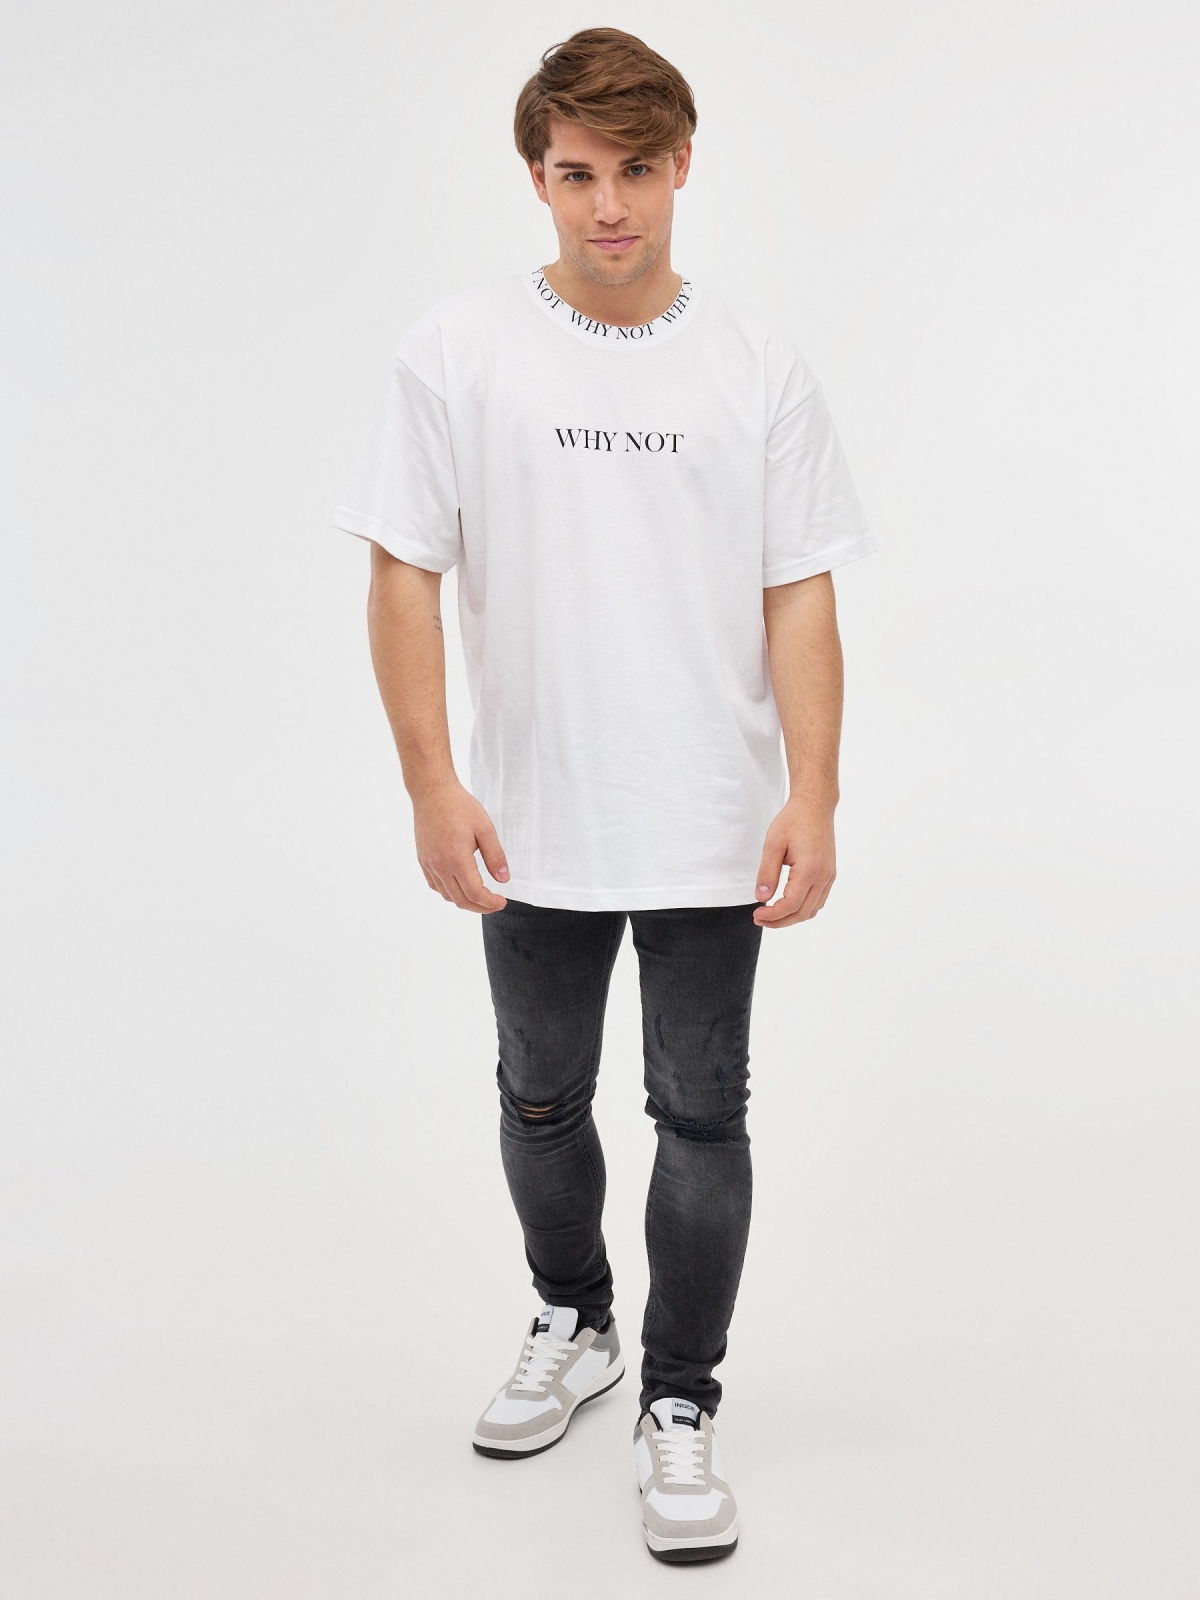 Why Not T-shirt branco vista geral frontal